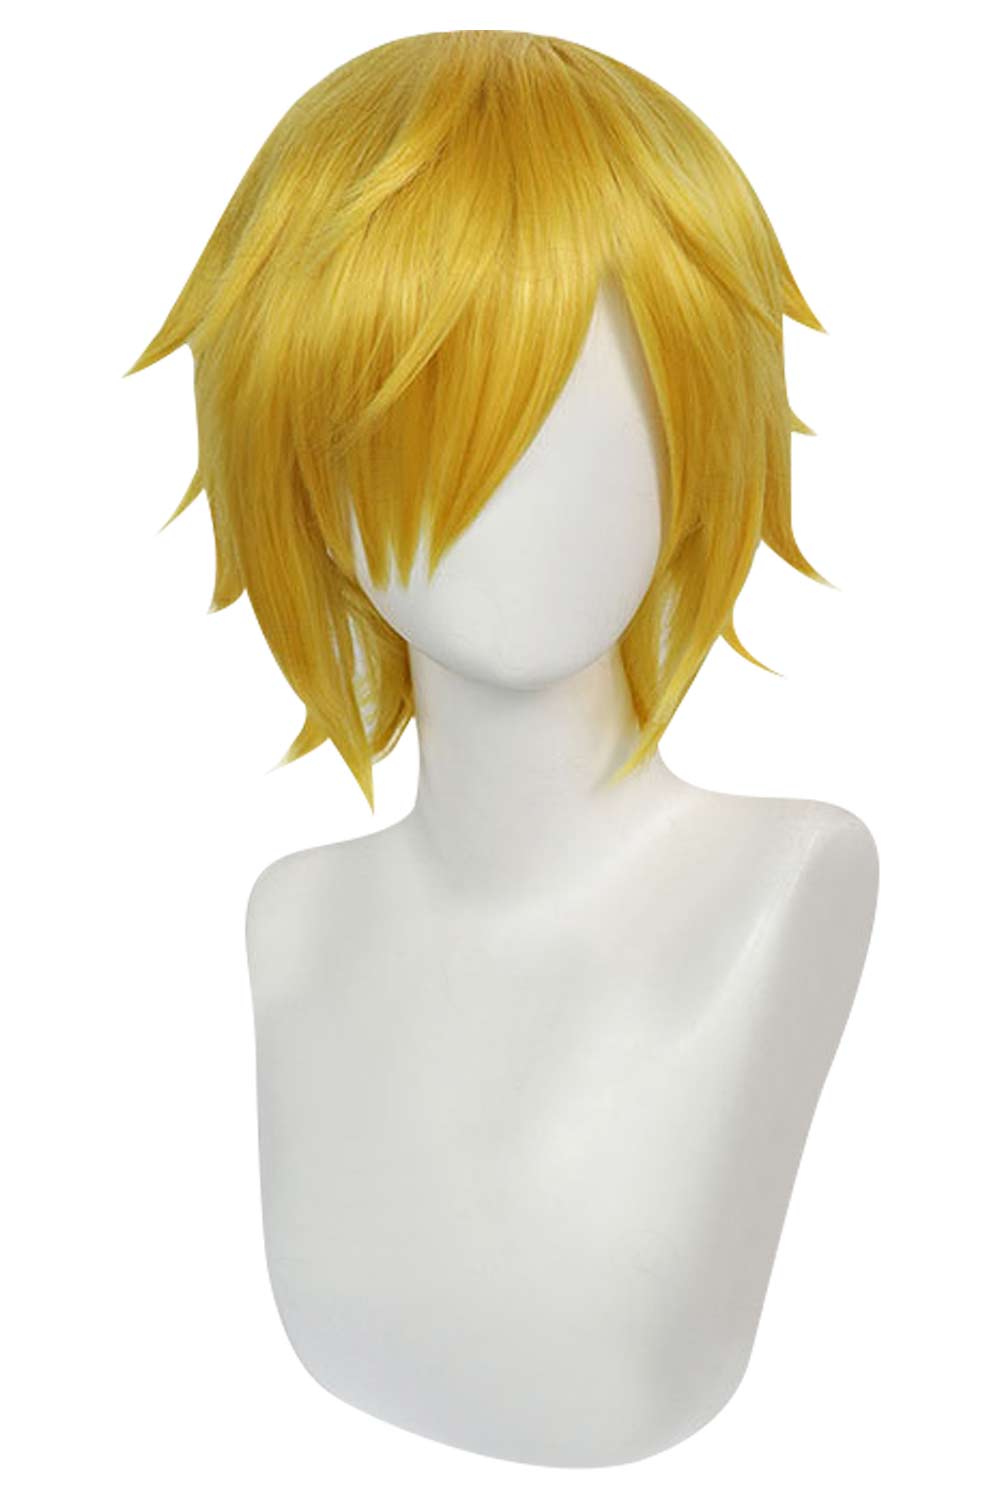 Anime One Piece Sanji Cosplay Wig Heat Resistant Synthetic Hair Halloween Costume Accessories